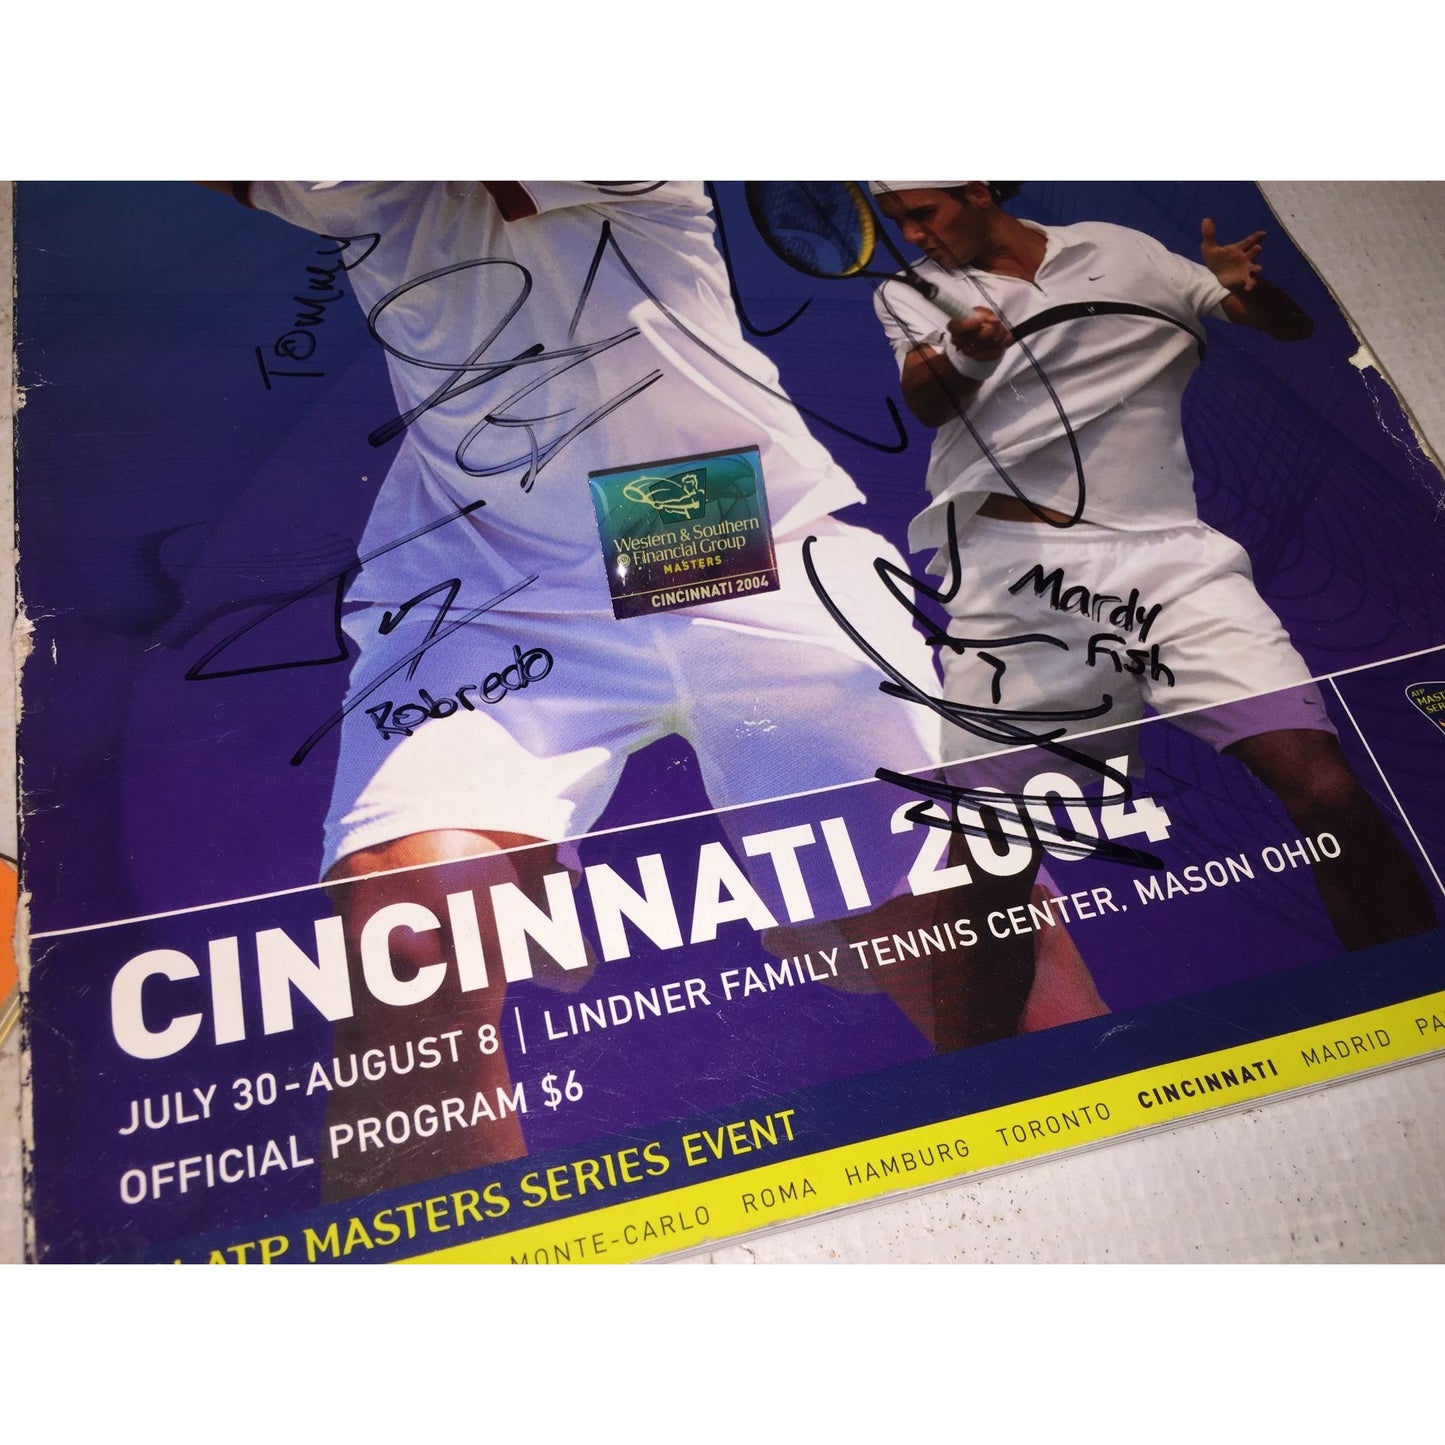 Vintage 2004 Western & Southern Financial Group Masters Tennis Autographed Tournament Program